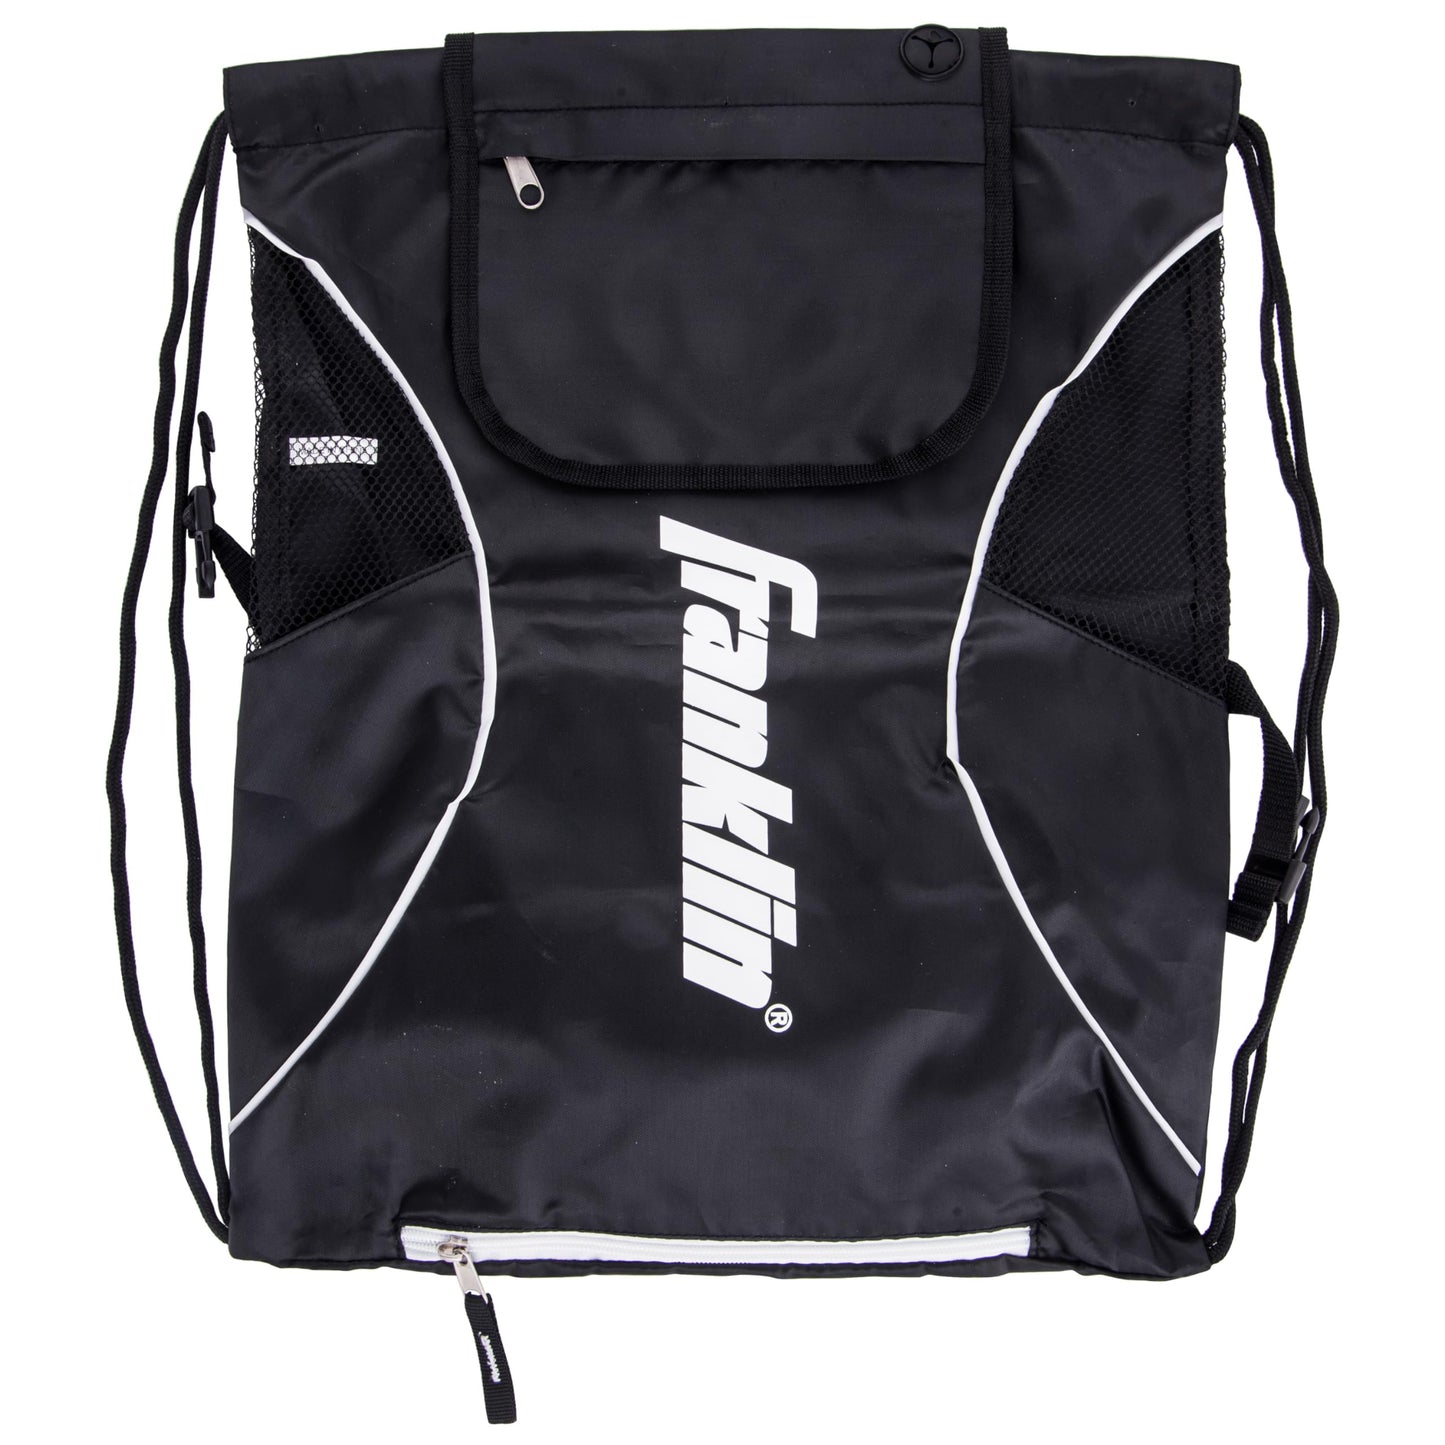 ports Soccer Bags - Deluxe Soccer Backpacks with Ball Holder